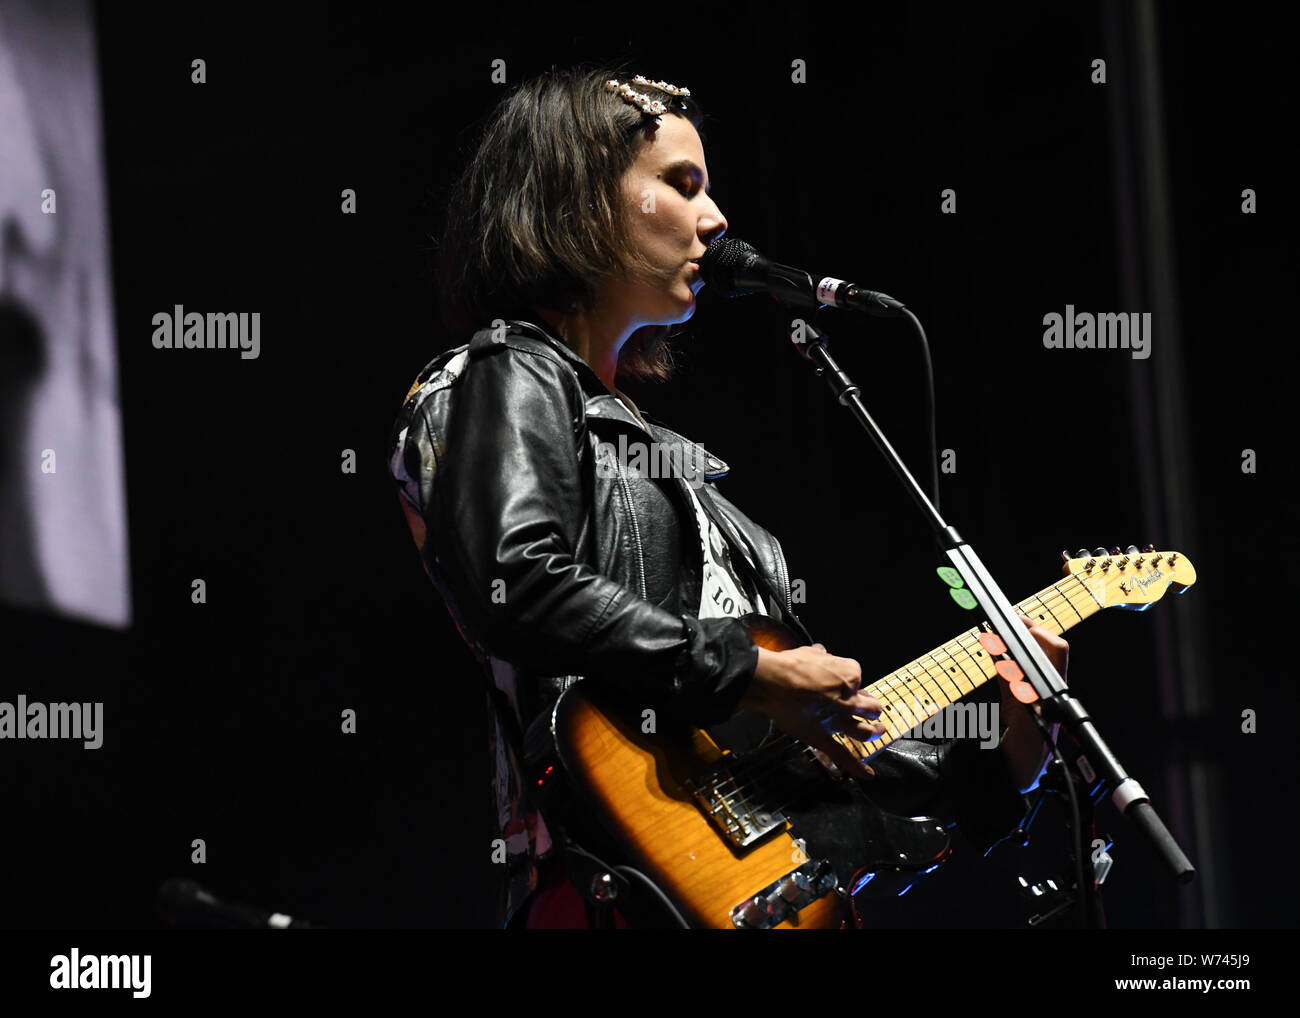 Long Beach, California, USA. 3rd Aug 2019. Nanna Bryndís Hilmarsdóttir of the band Of Monsters and Men performs at ALT 98.7 Summer Camp at the Queen Mary in Long Beach on August 3, 2019. Credit: The Photo Access/Alamy Live News Stock Photo